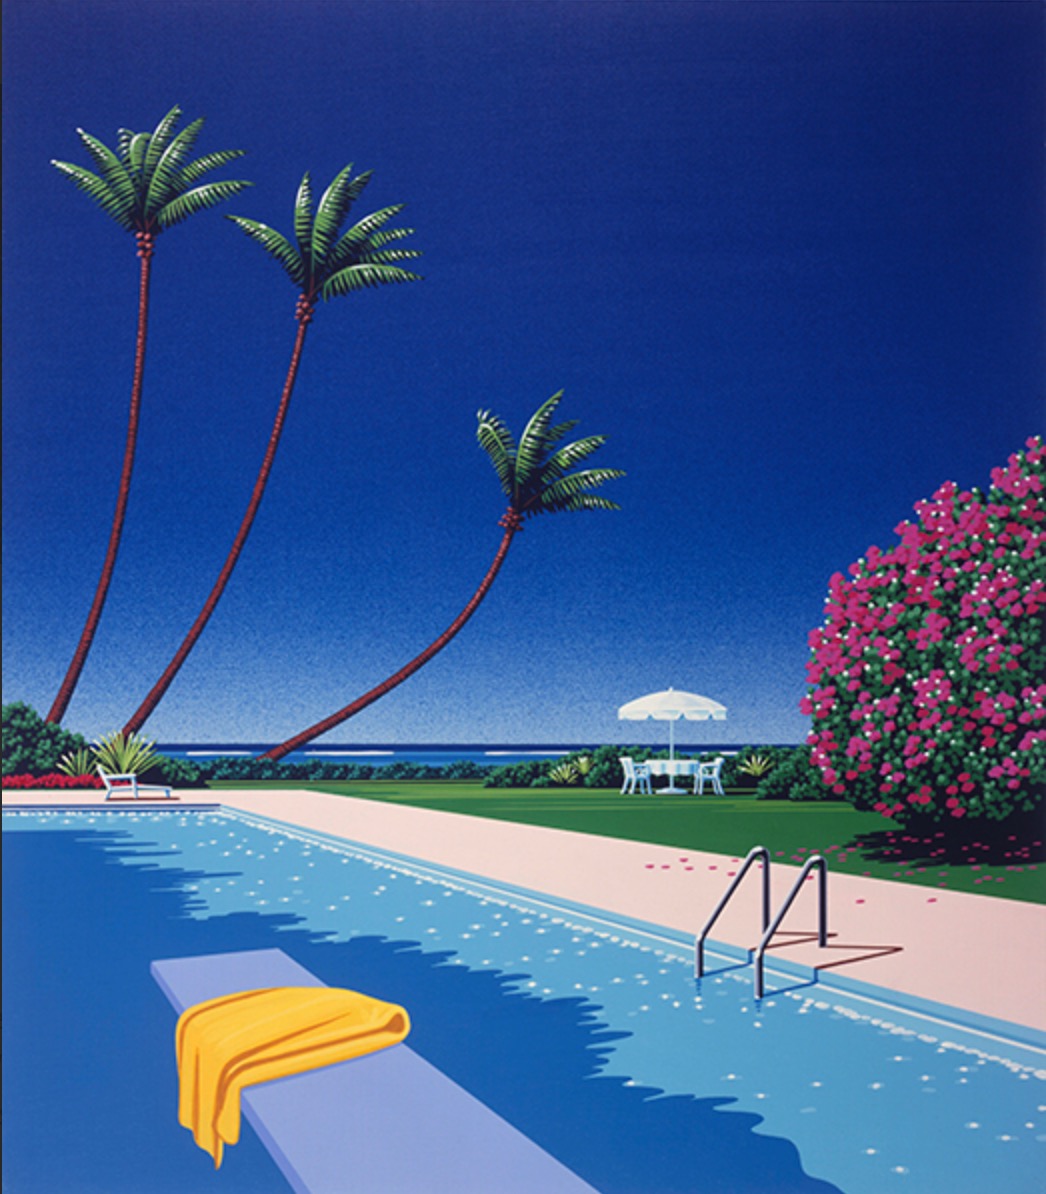 Hiroshi Nagai : Paintings for Music at the Japan Foundation | It's